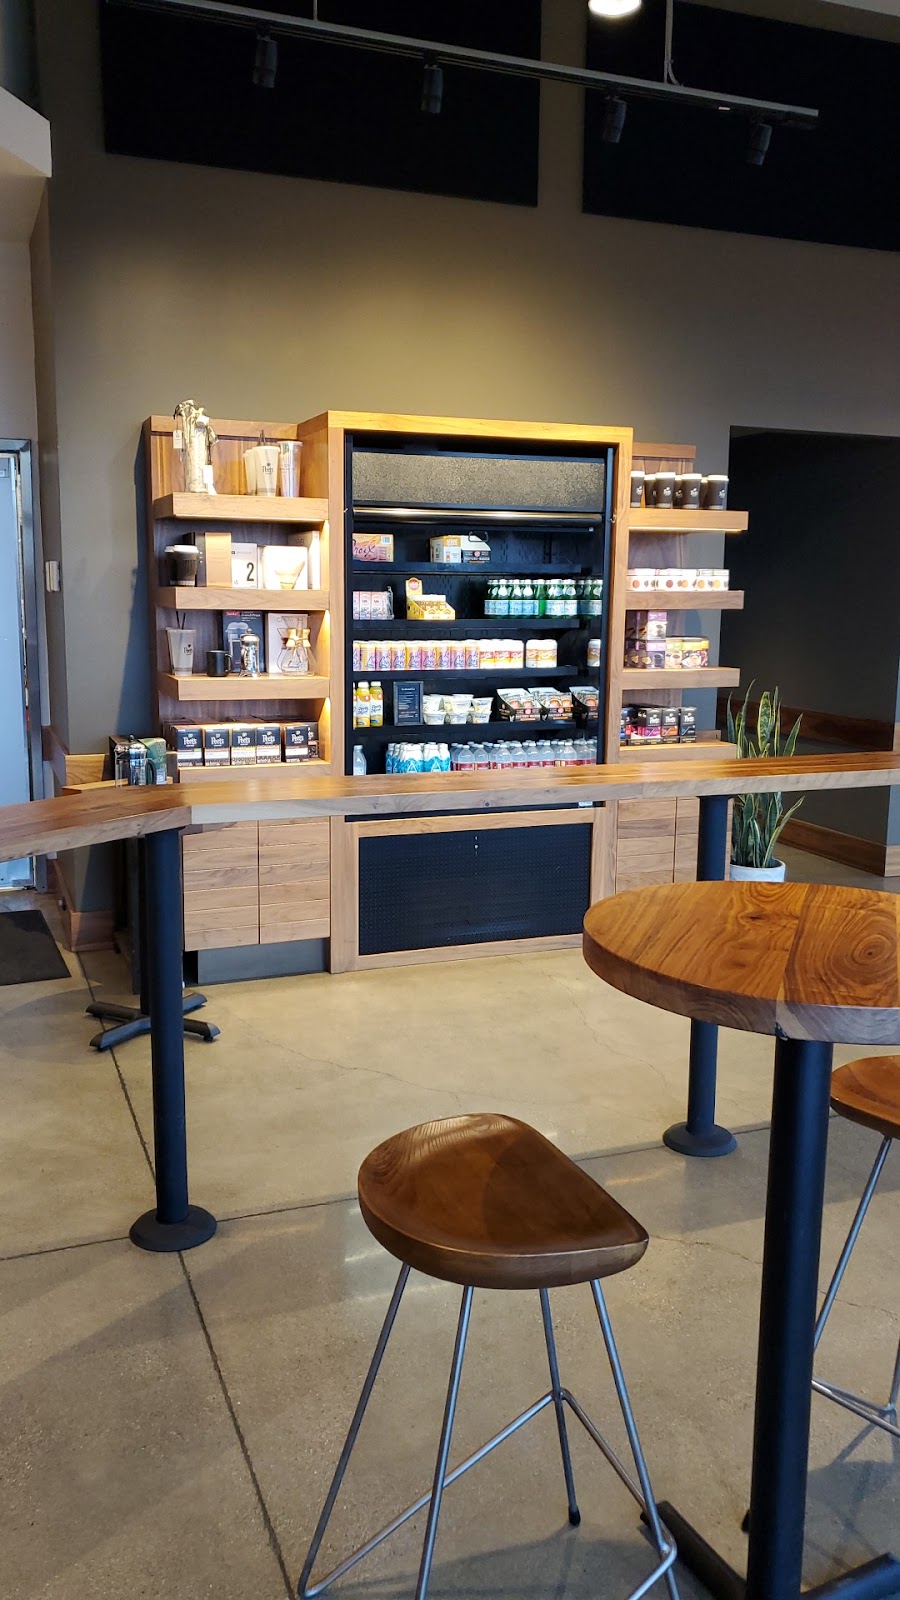 Peets Coffee | 4180 Thrive Dr. Suite 100, Roseville, CA 95678 | Phone: (916) 252-9696